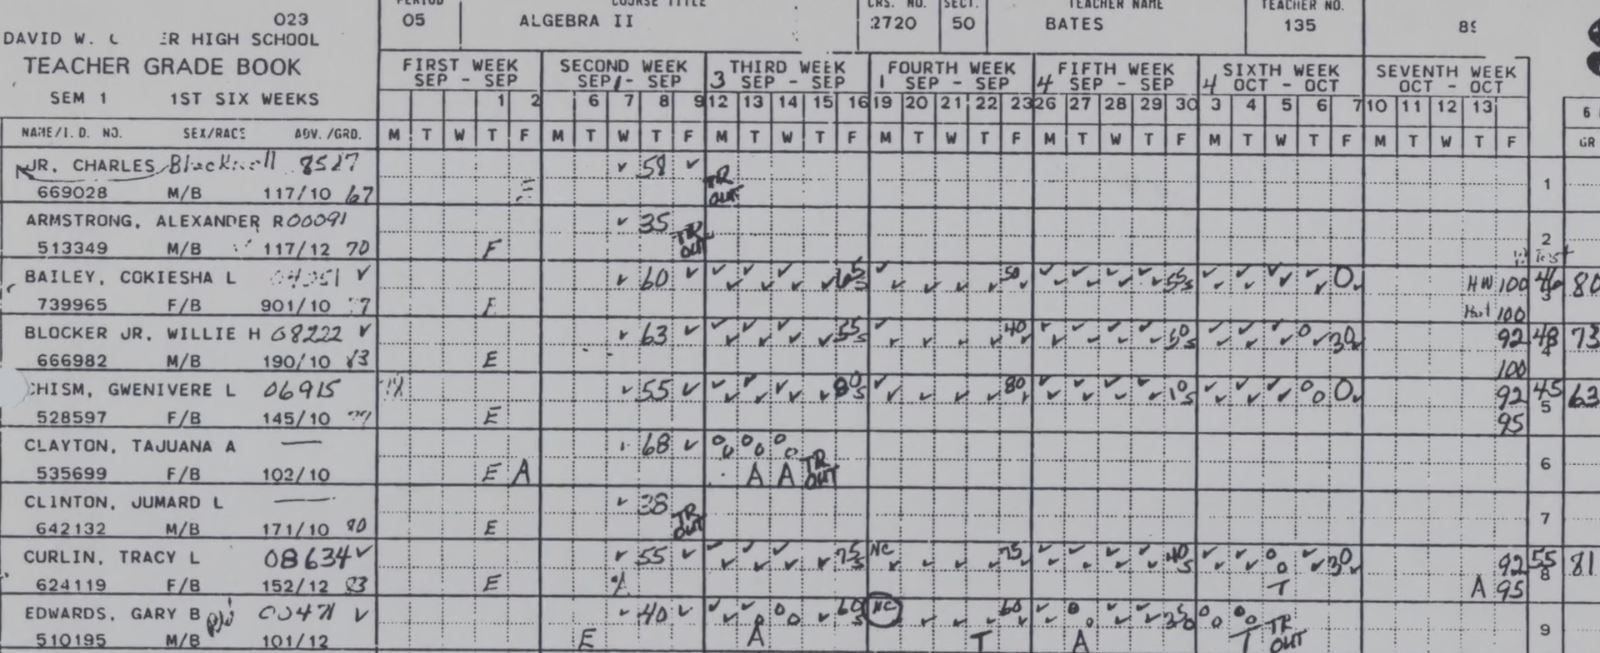 Strange symbols in Bates' grade book only complicated matters. Student Gary Edwards'...